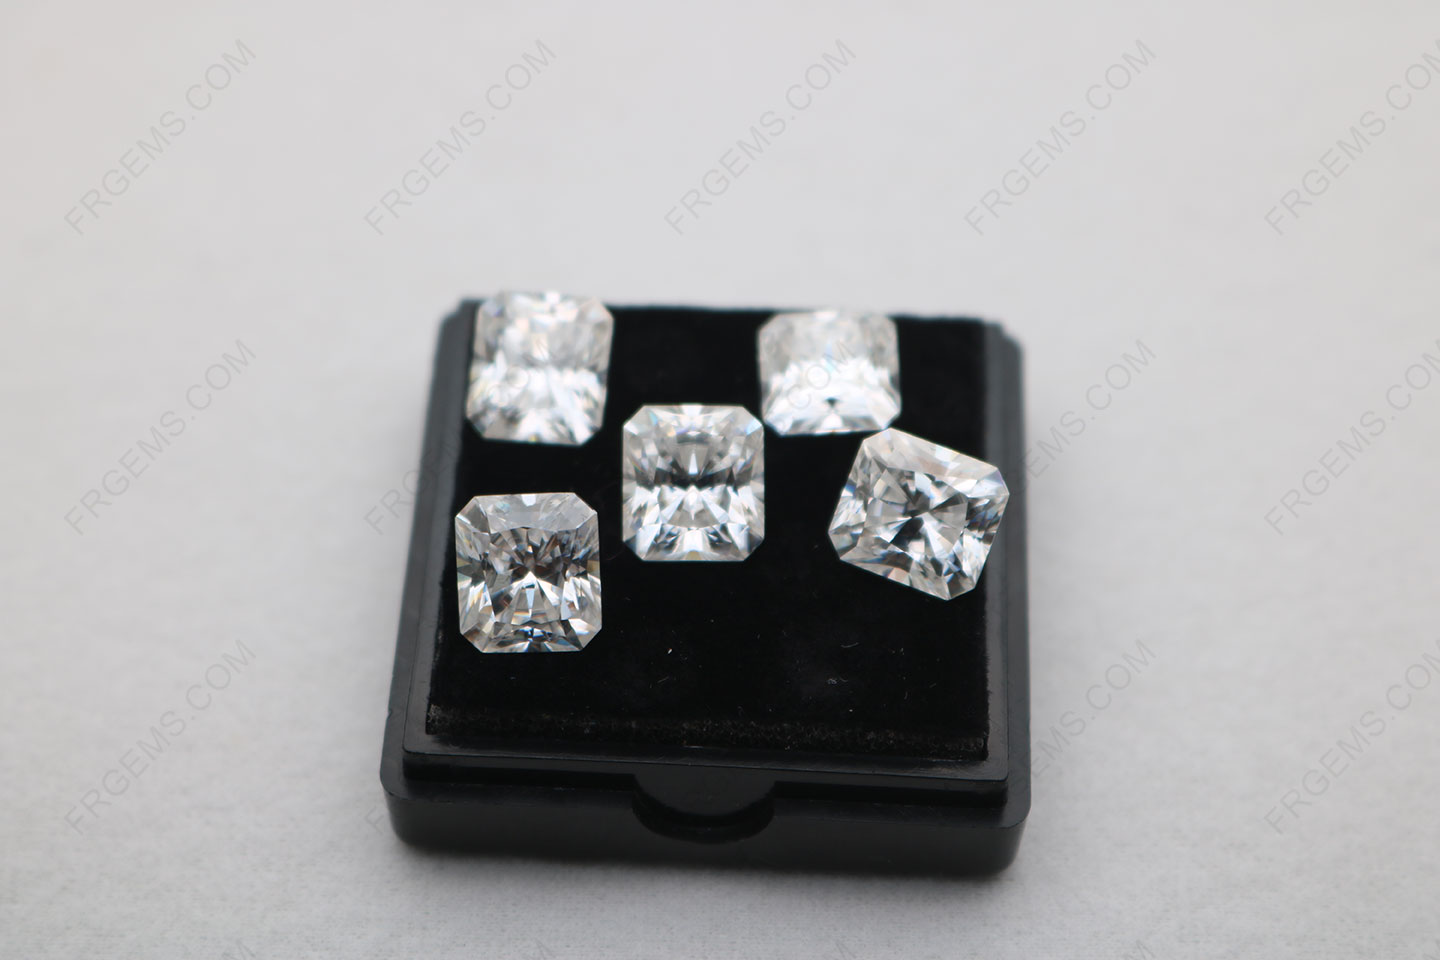 Buy Best quality Loose Moissanite D White Color Radiant cut 10x9mm gemstones from China